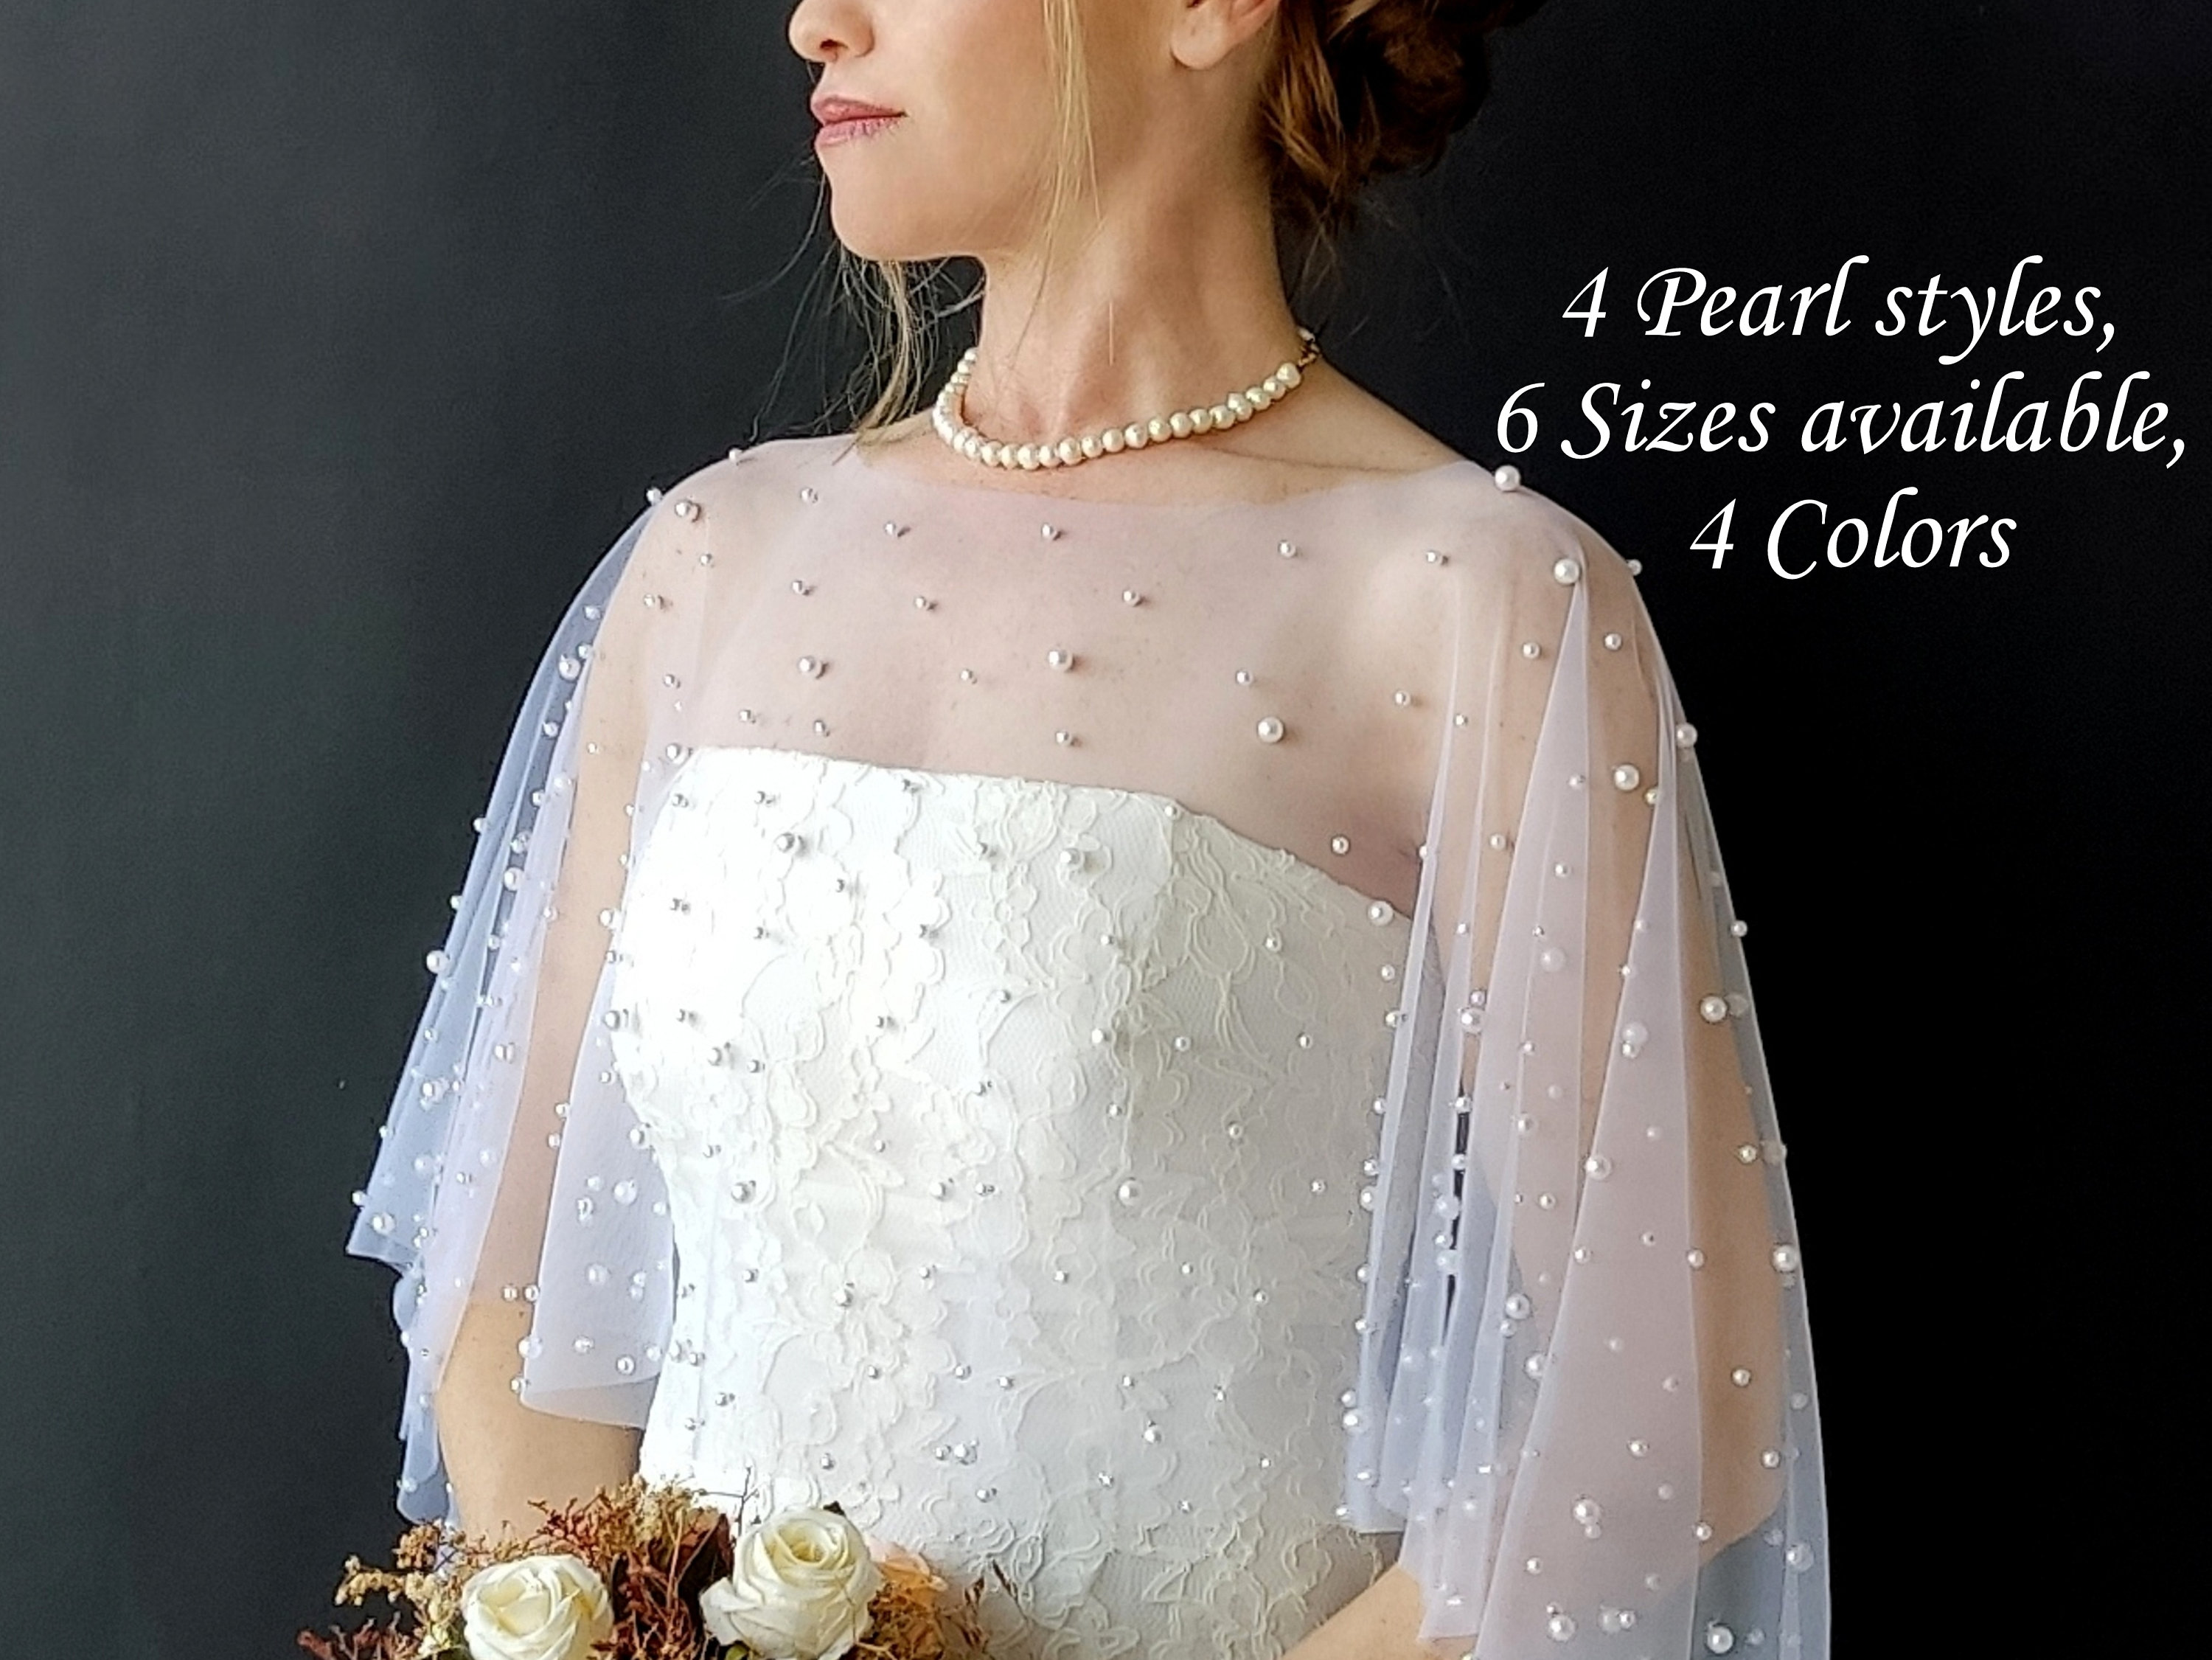 25 Beautiful Pearl Wedding Dresses & Accessories from